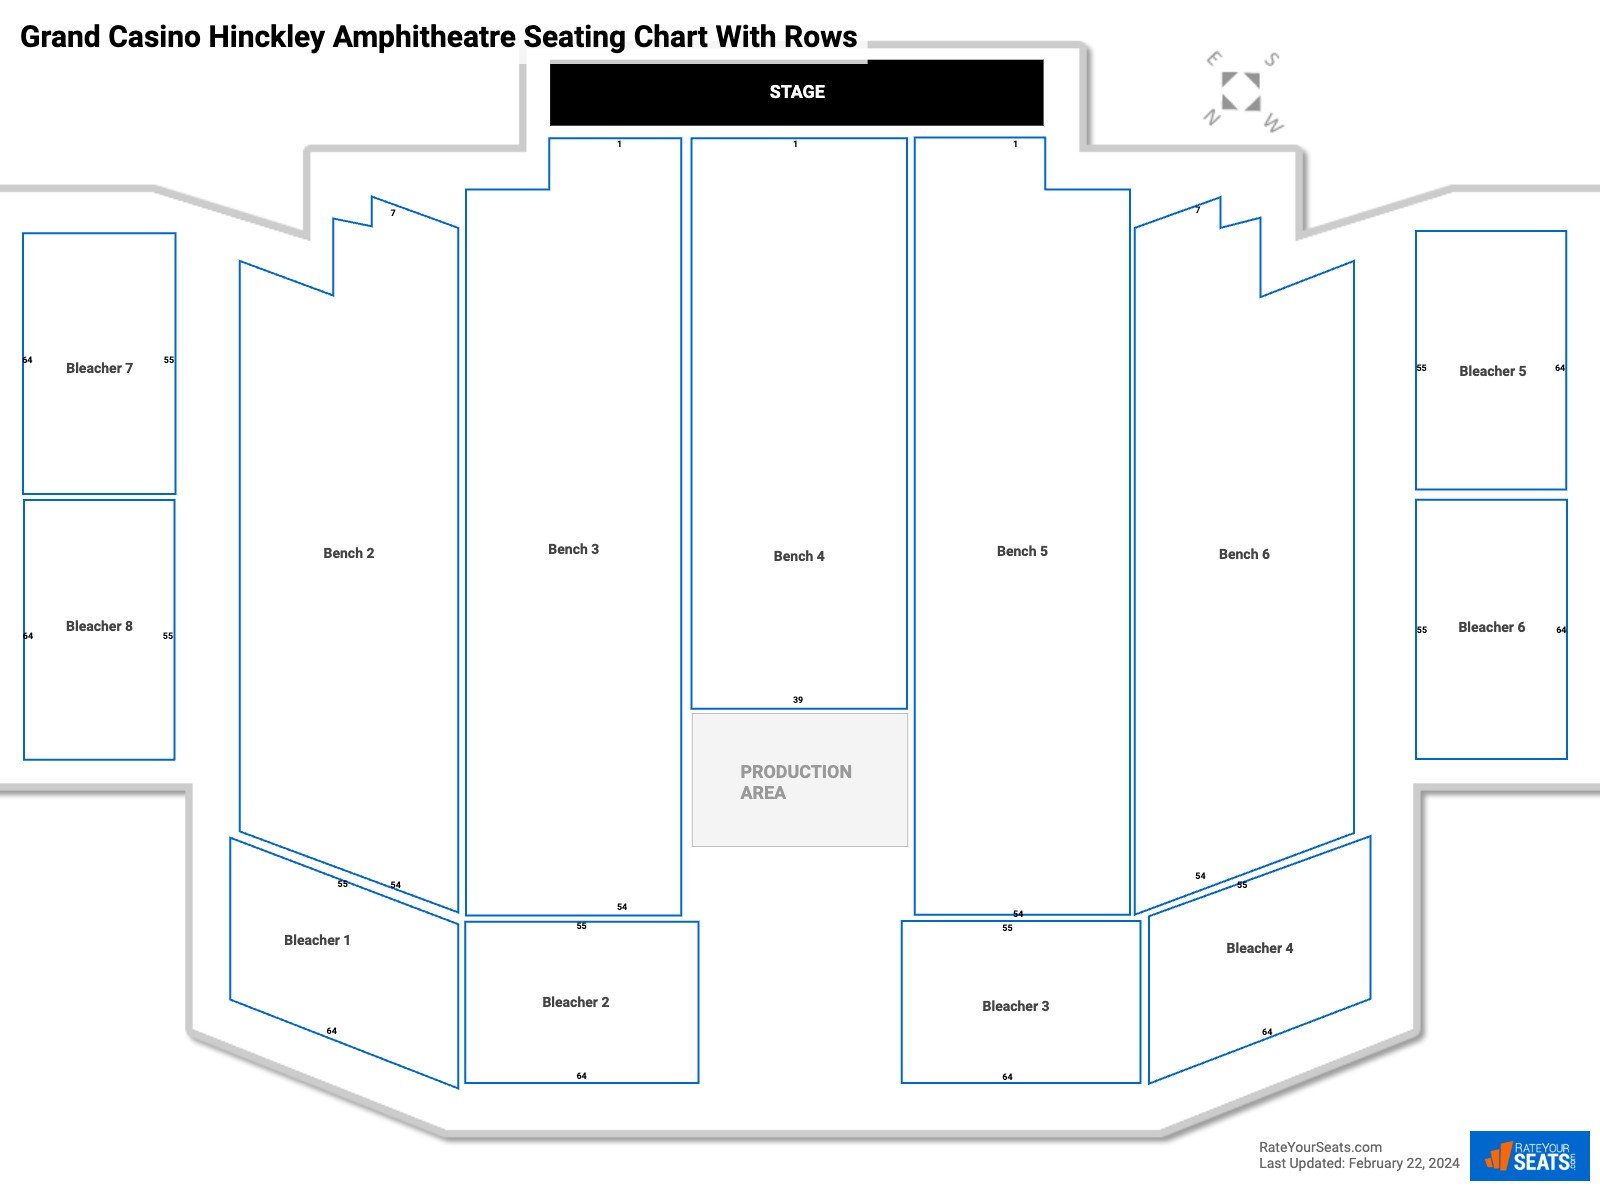 Grand Casino Hinckley Amphitheatre seating chart with row numbers